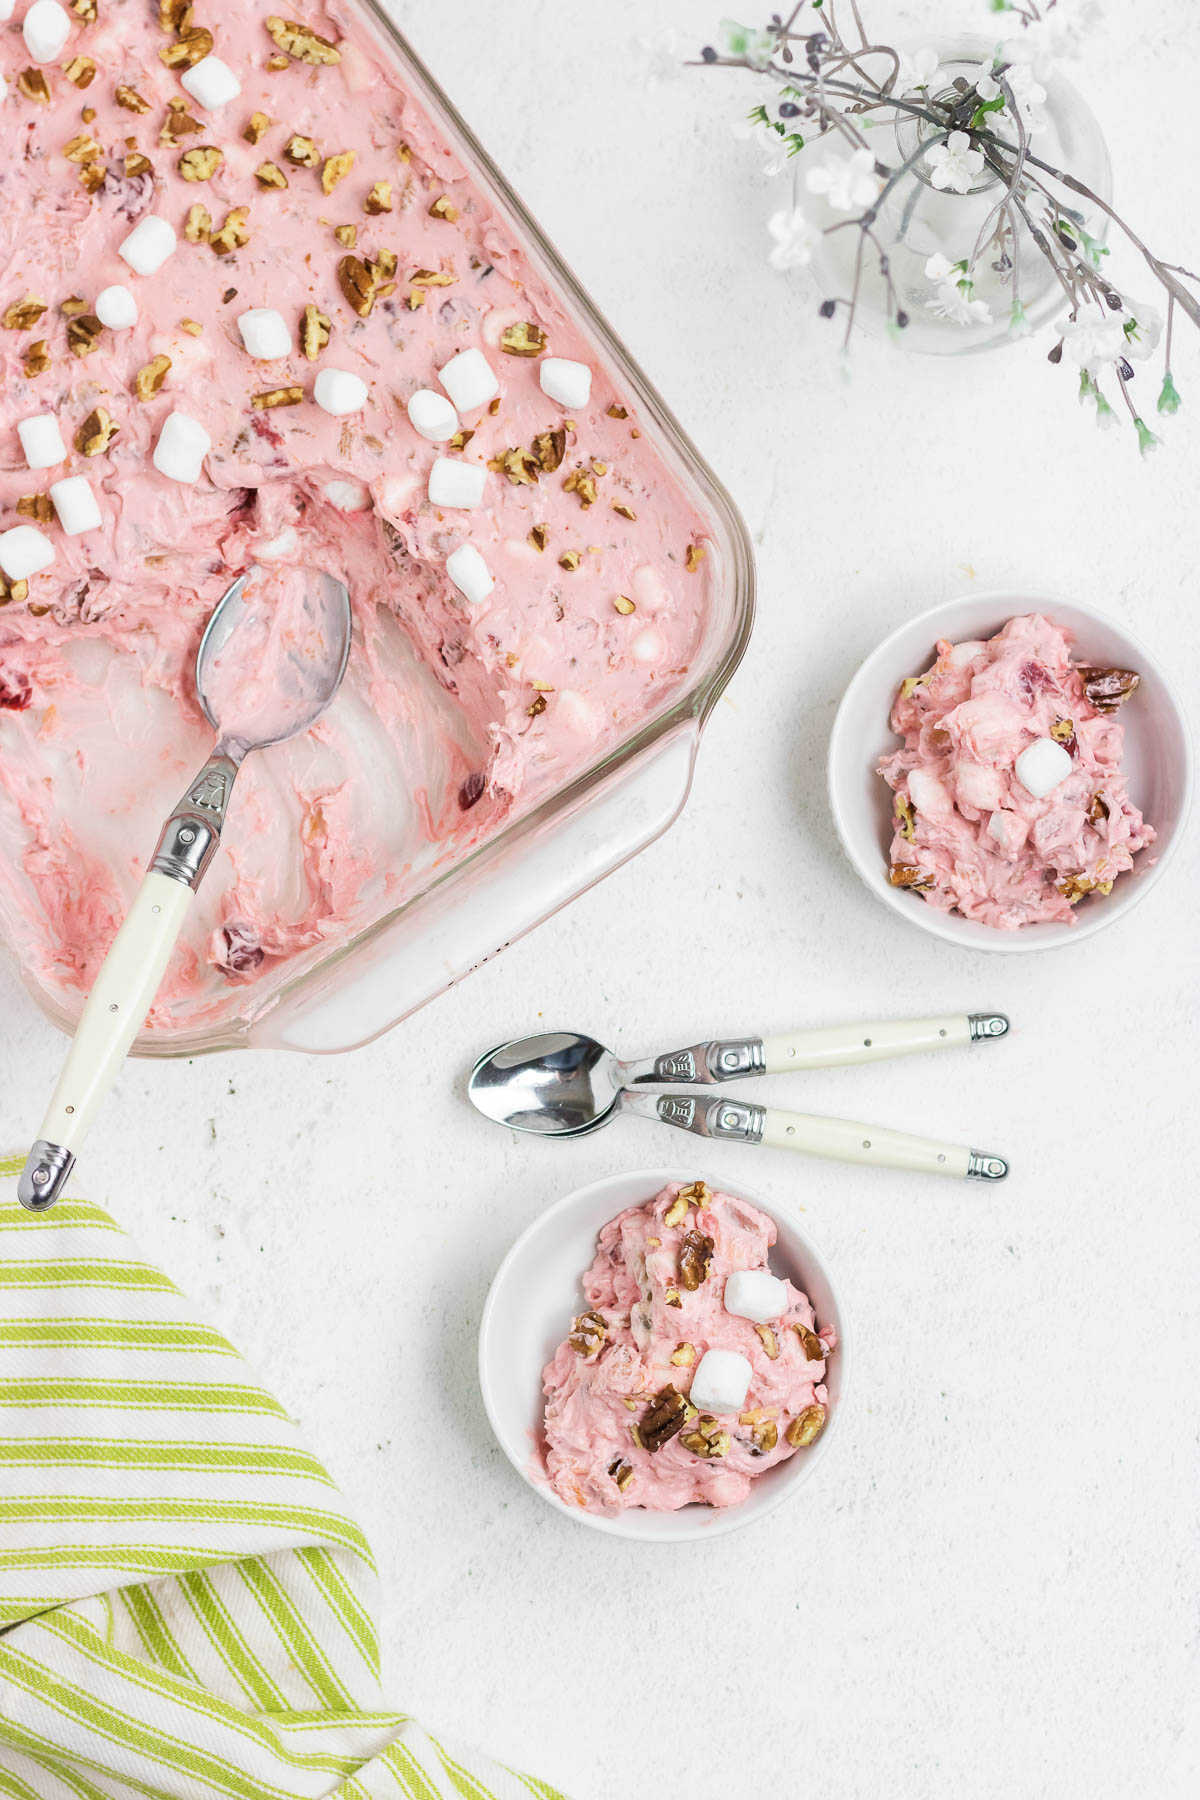 Overhead view of creamy pink salad with marshmallows.